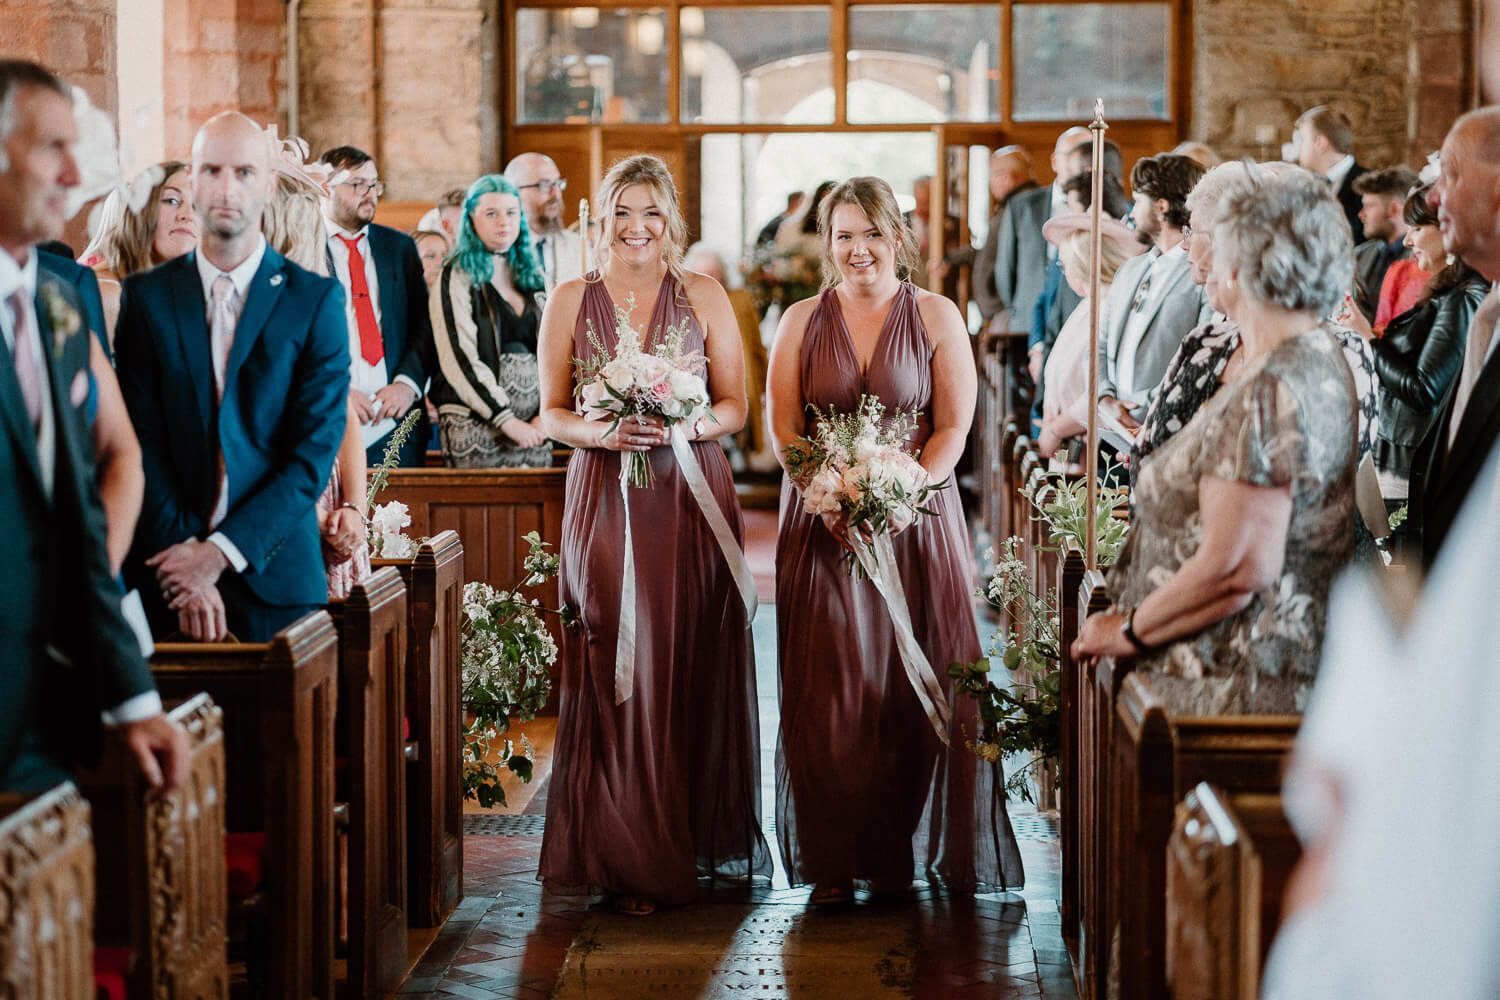 Bridesmaids walk down the aisle at St Andrew's Church in Ipplepen, Devon.